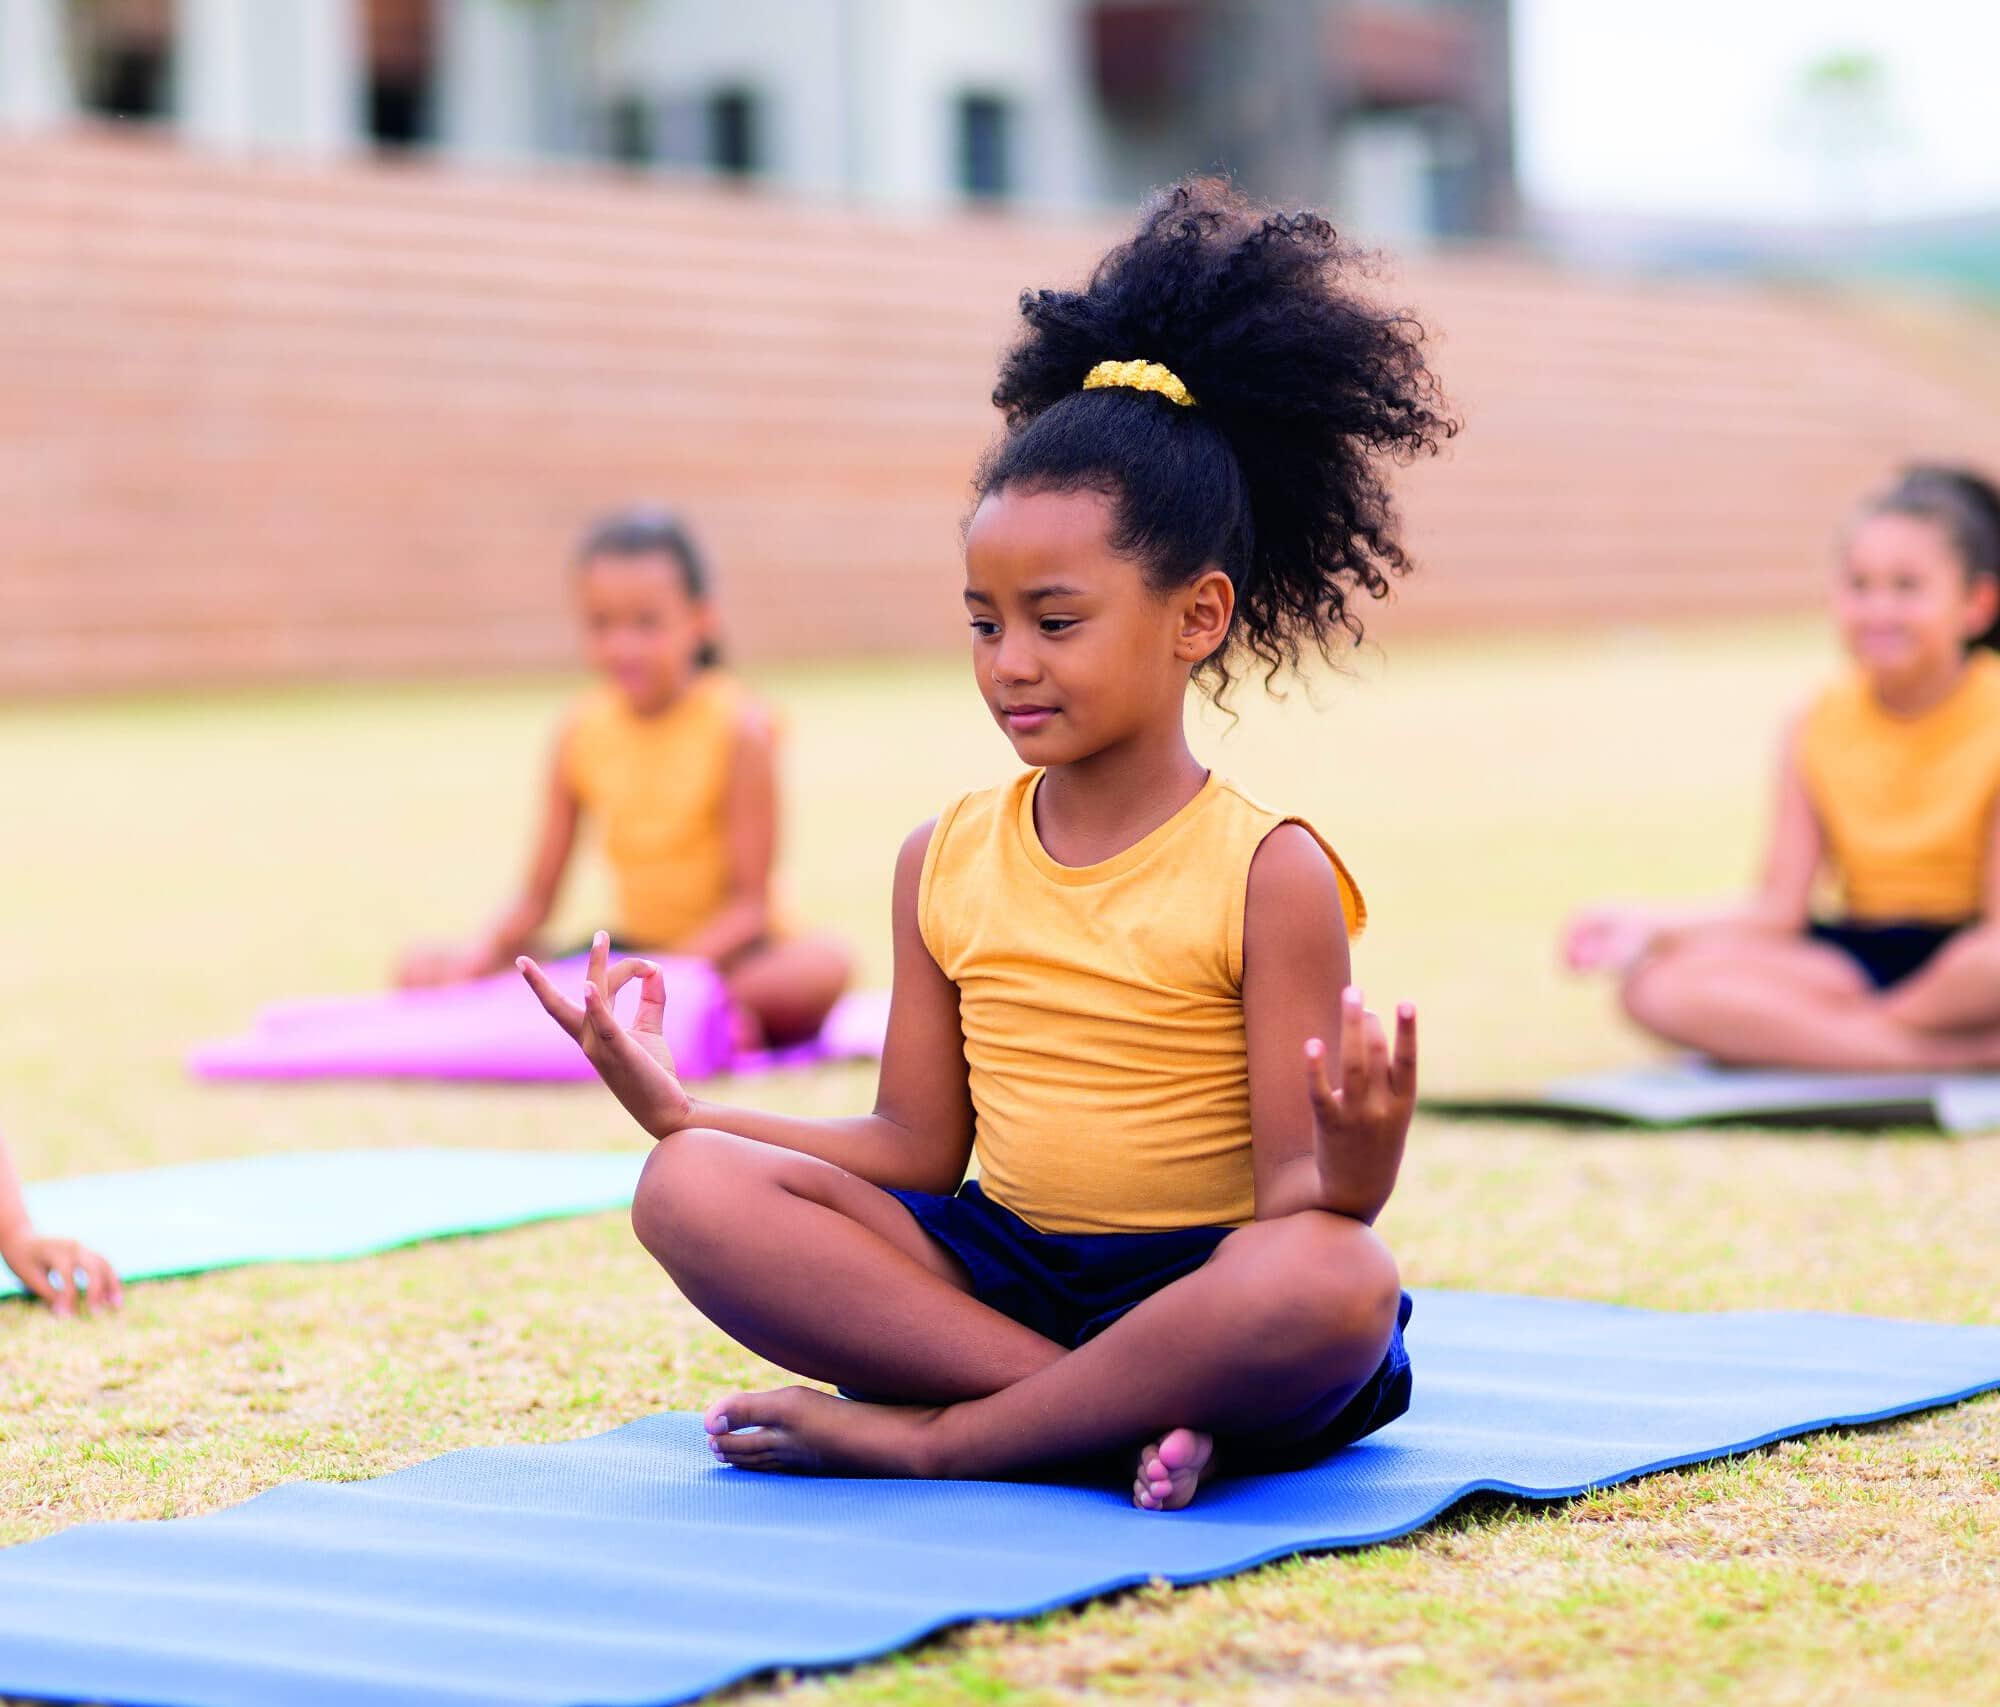 Multiracial elementary schoolgirls with gesturing while sitting on yoga mat at school ground. unaltered, childhood, education, activity, sports training, yoga and physical education concept.